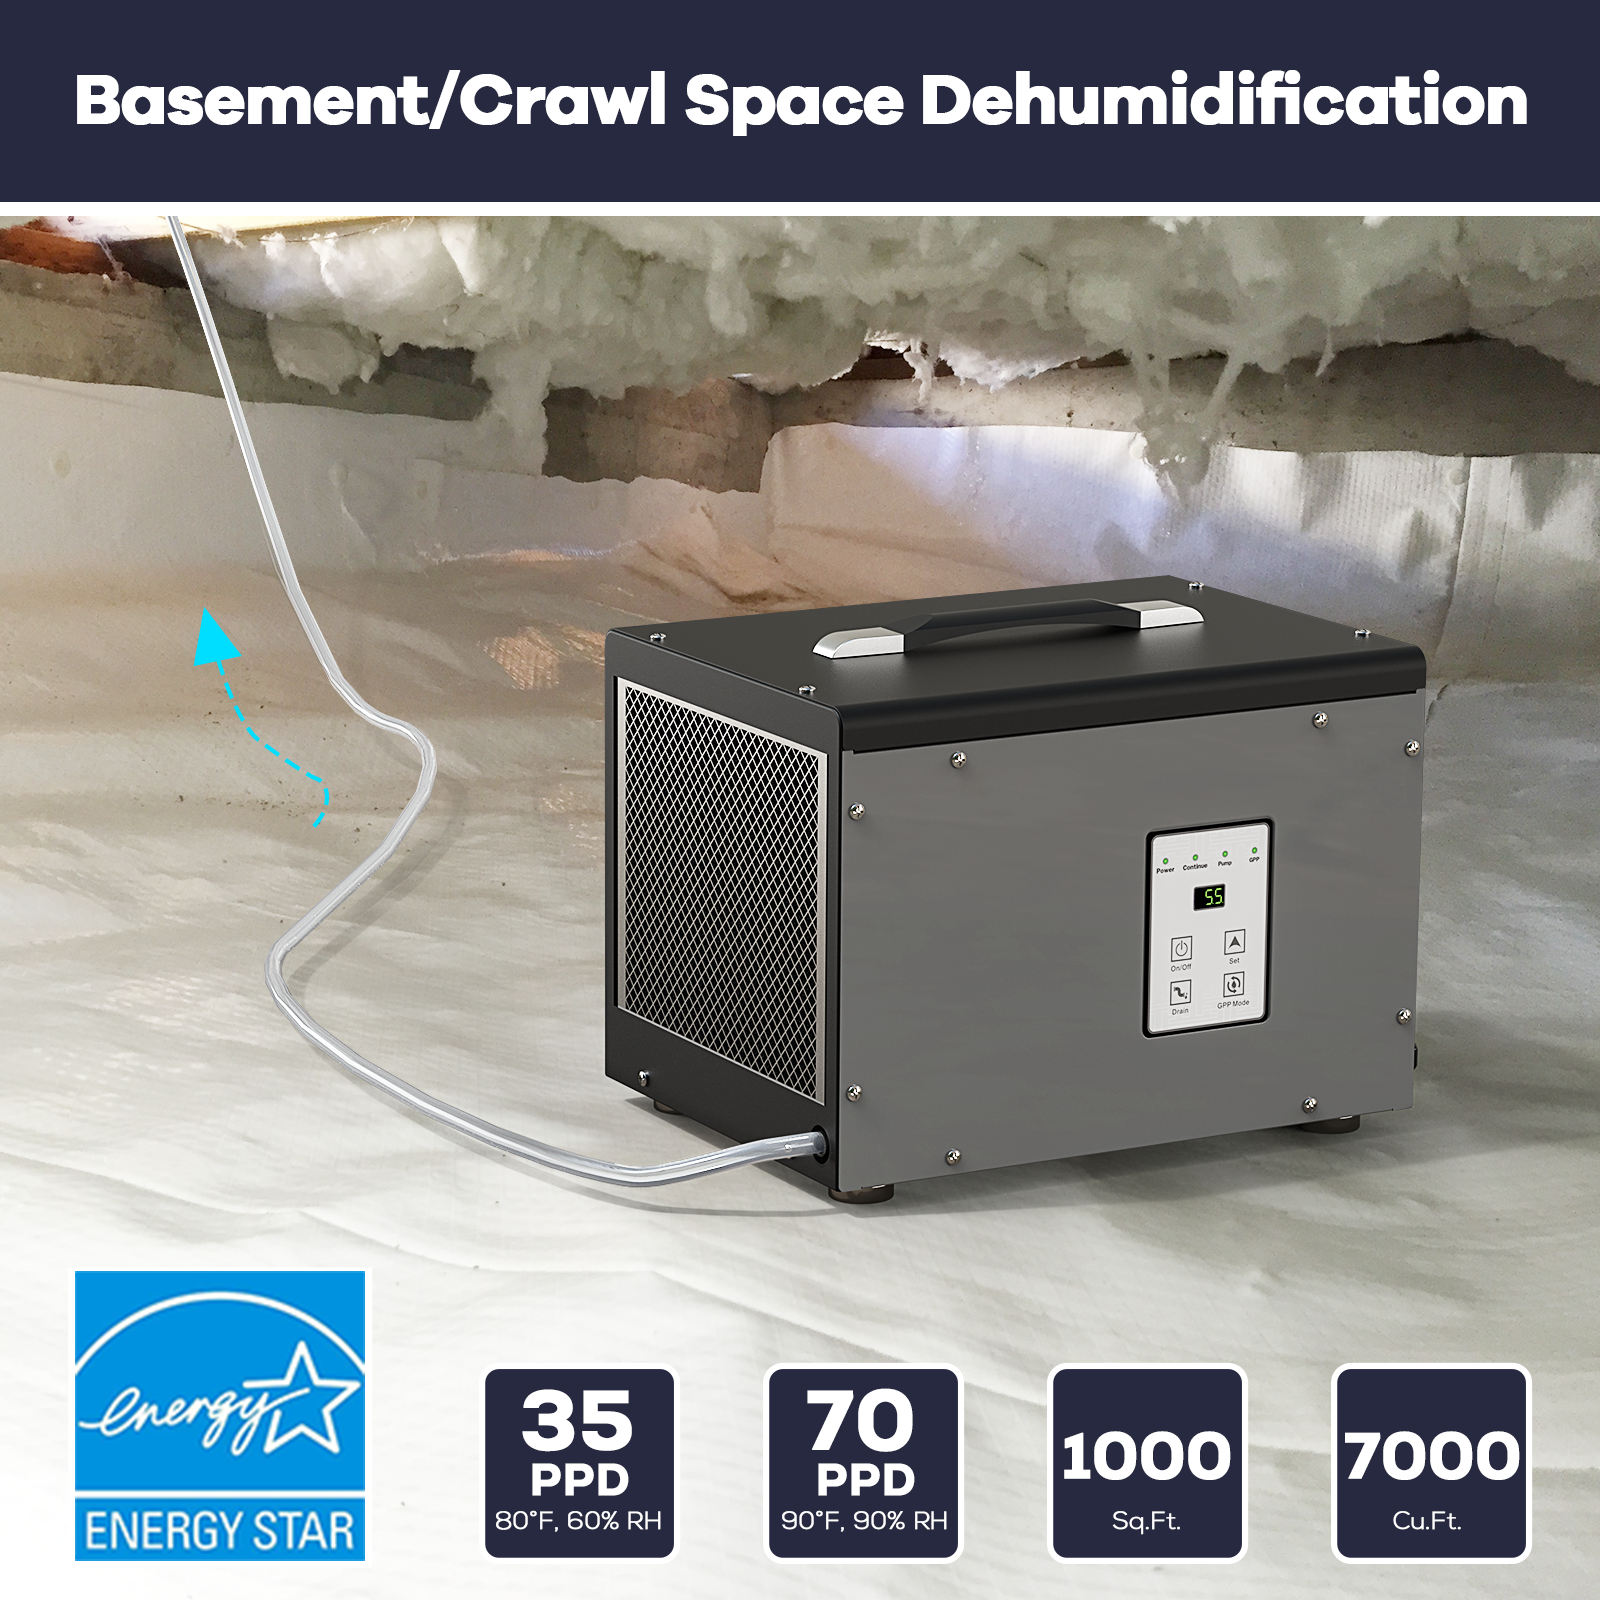 BaseAire 70 PPD Crawl Space Dehumidifier, Energy Star Crawlspace Dehumidifiers Commercial Dehu for Home and Basements - Crawl Space dehumidifier from [store] by Baseaire - 